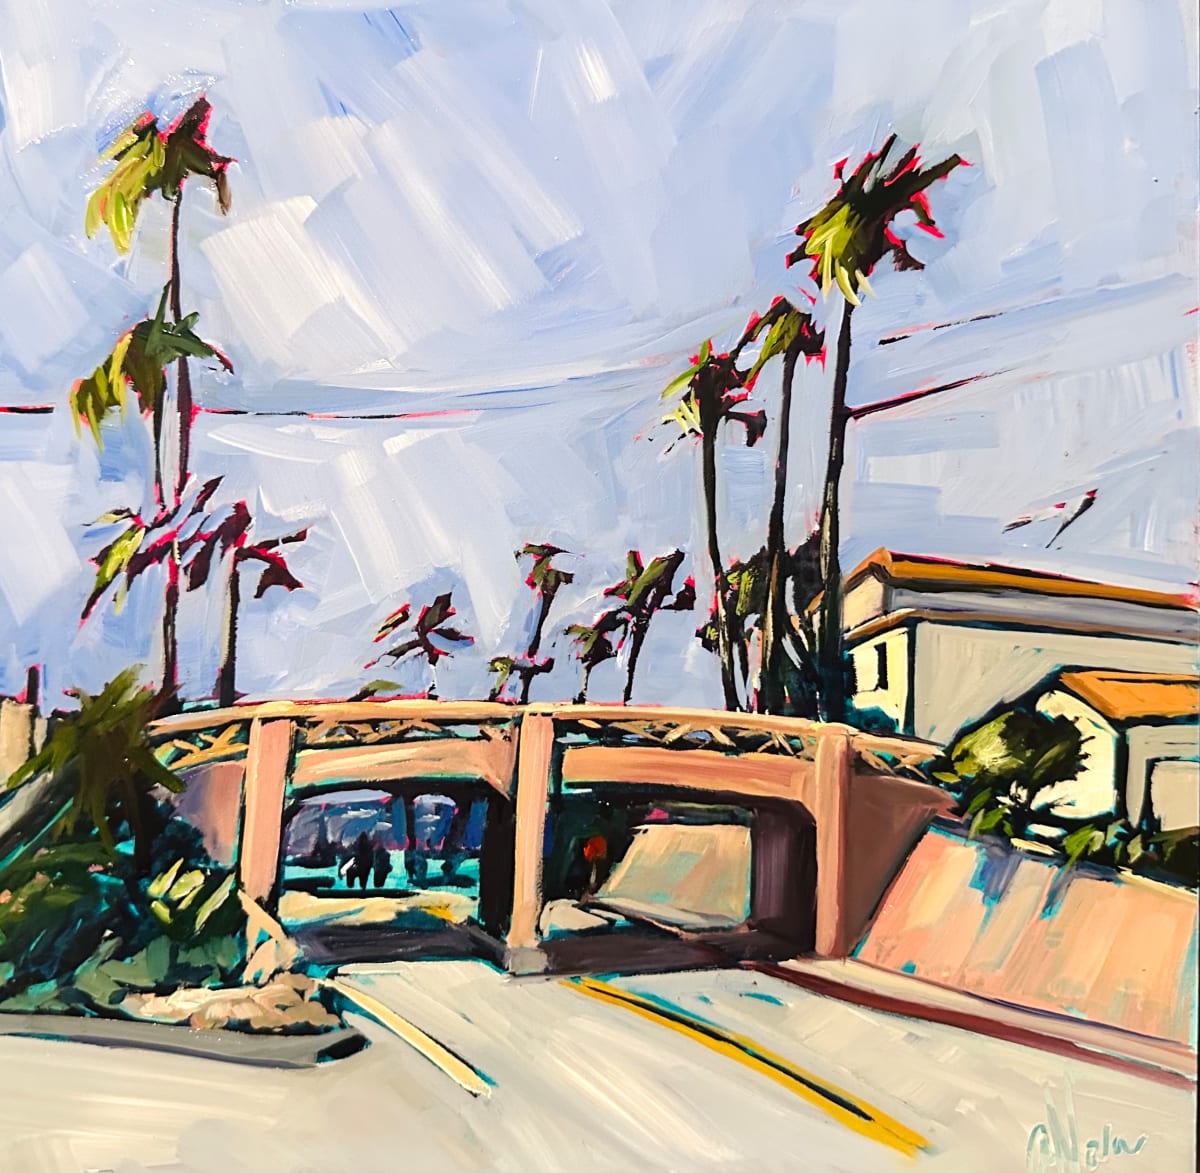 Cassidy Street Bridge by Andrea Nova  Image: 
Across this footbridge is the entrance to the beach where I spent most of my childhood summers. It was a quiet spot, my escape to enjoy the surf and sun. If I wasn't home, you could bet I was at Cassidy Street Beach. This piece was painted on a hot July day during the Oceanside Museum Plein Air Festival.